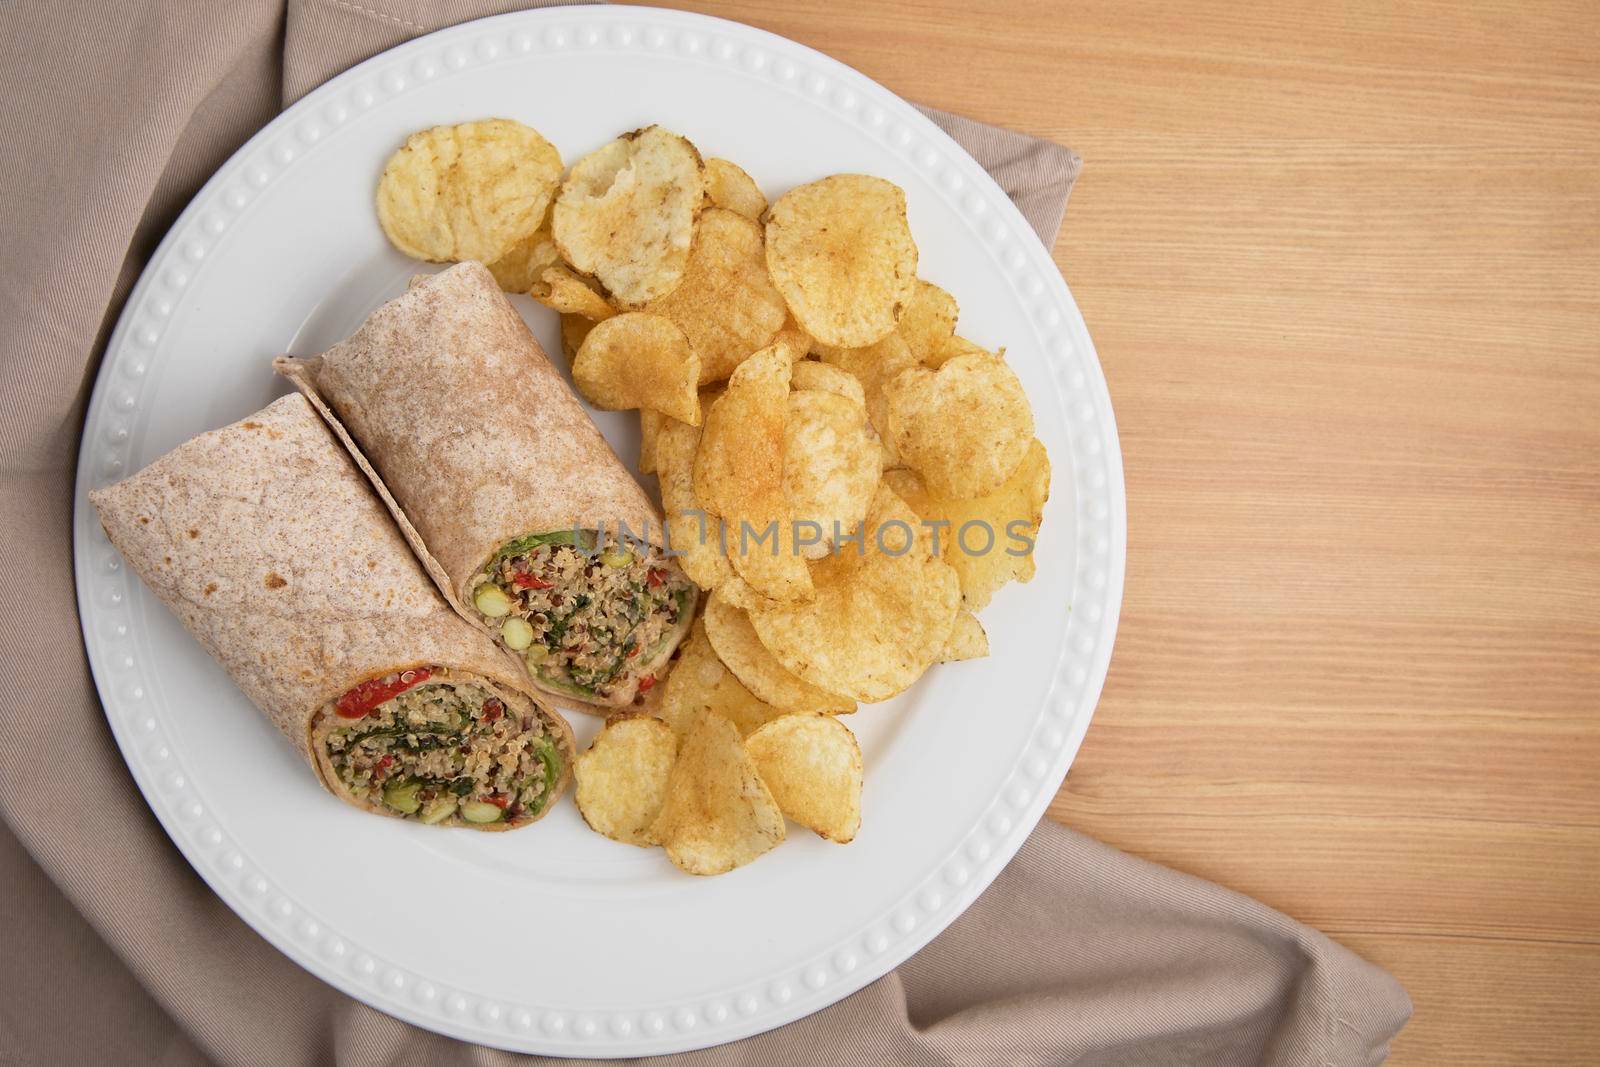 Vegan quinoa wrap served with chips.